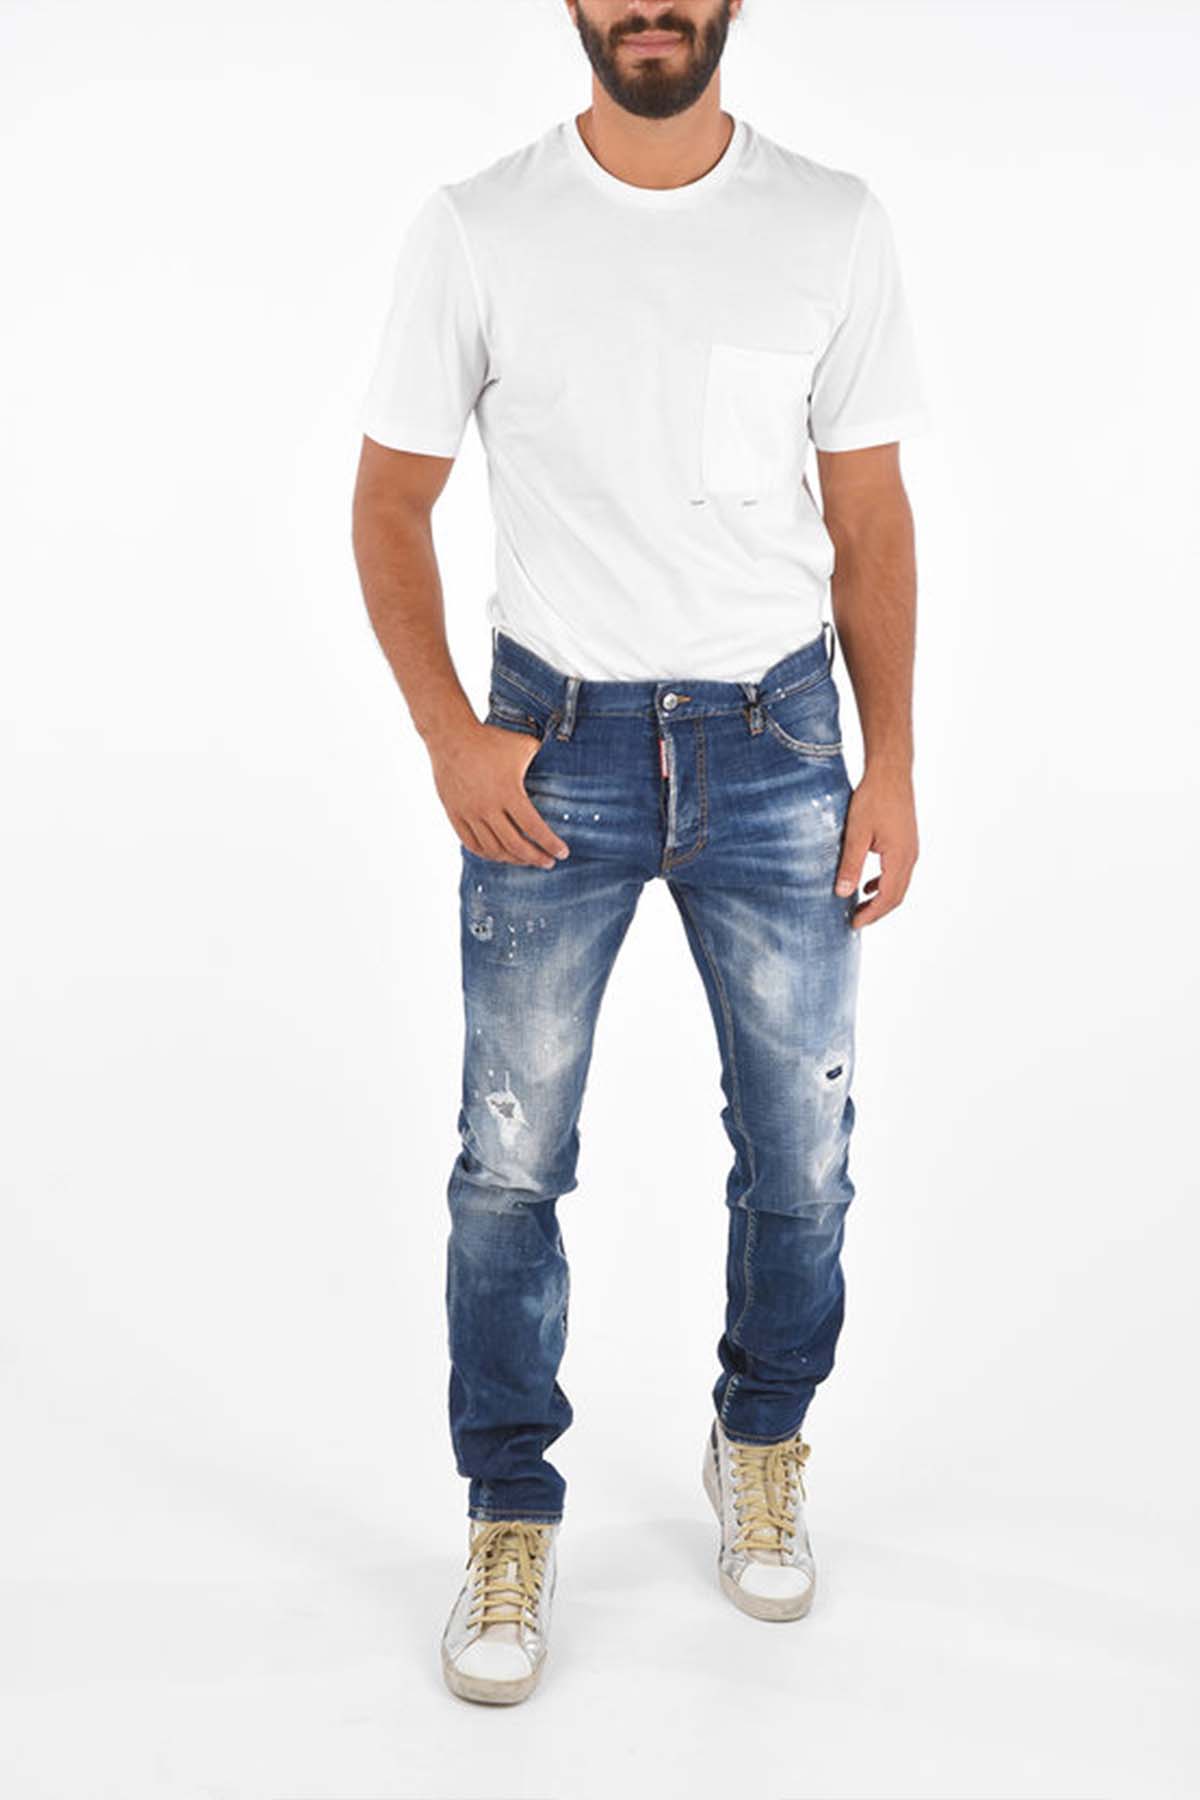 WASHED-OUT COOL GUY FIT JEANS 17 CM